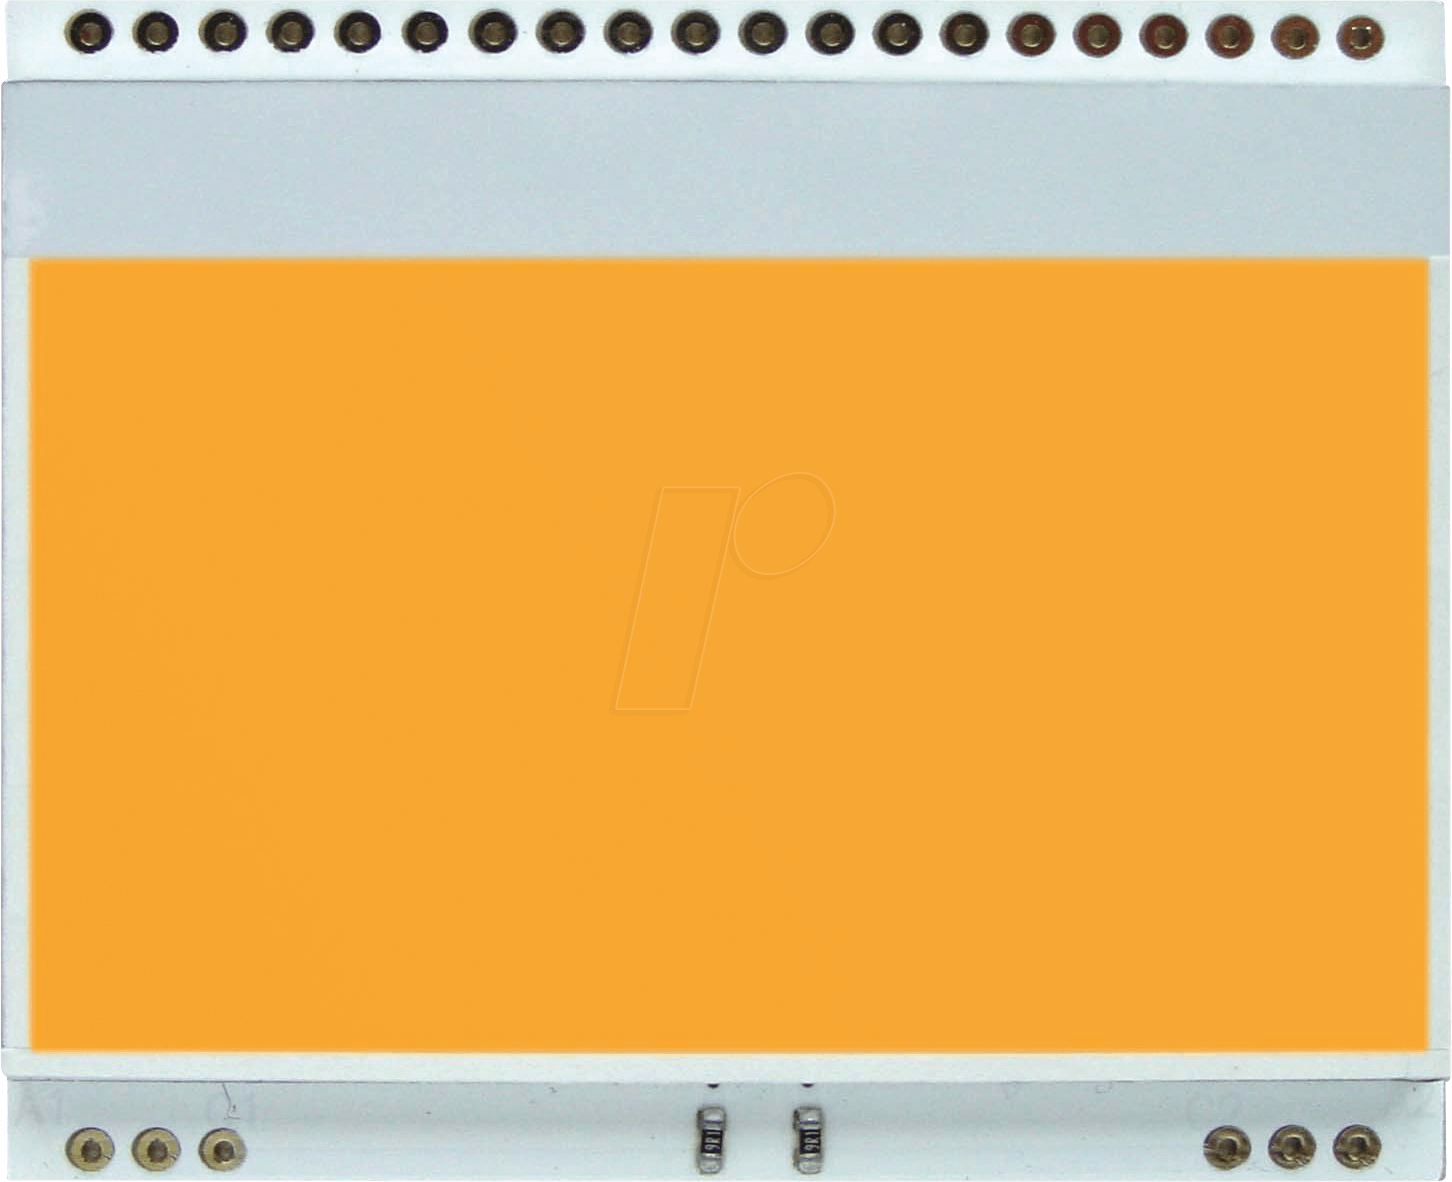 EA LED55X46-A - LED-Beleuchtung für EA DOGM128, 52 x 32 mm, amber von DISPLAY VISIONS